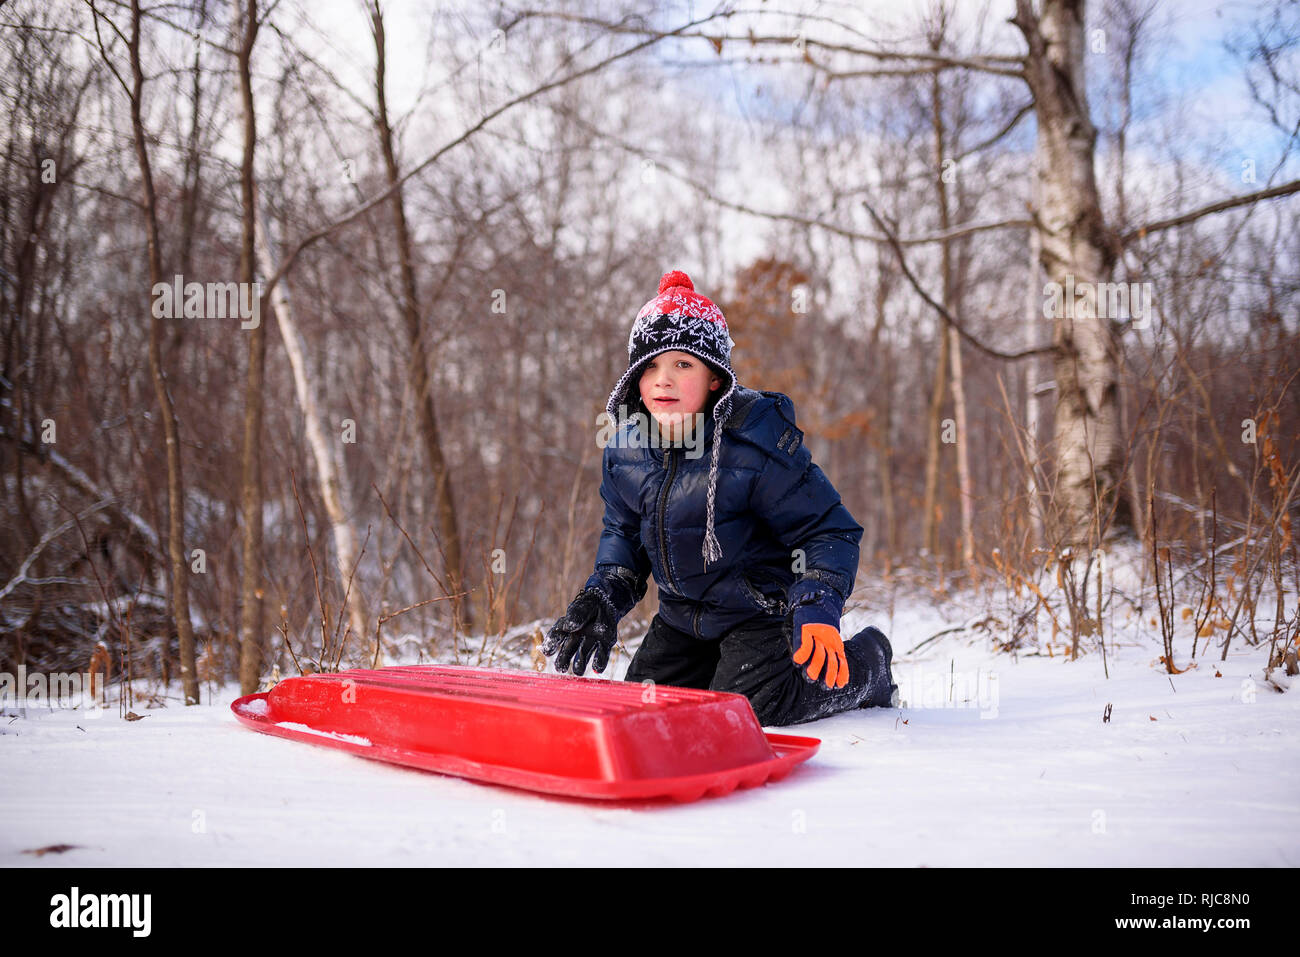 Boy sitting by a sledge in the forest, Wisconsin, United States Stock Photo